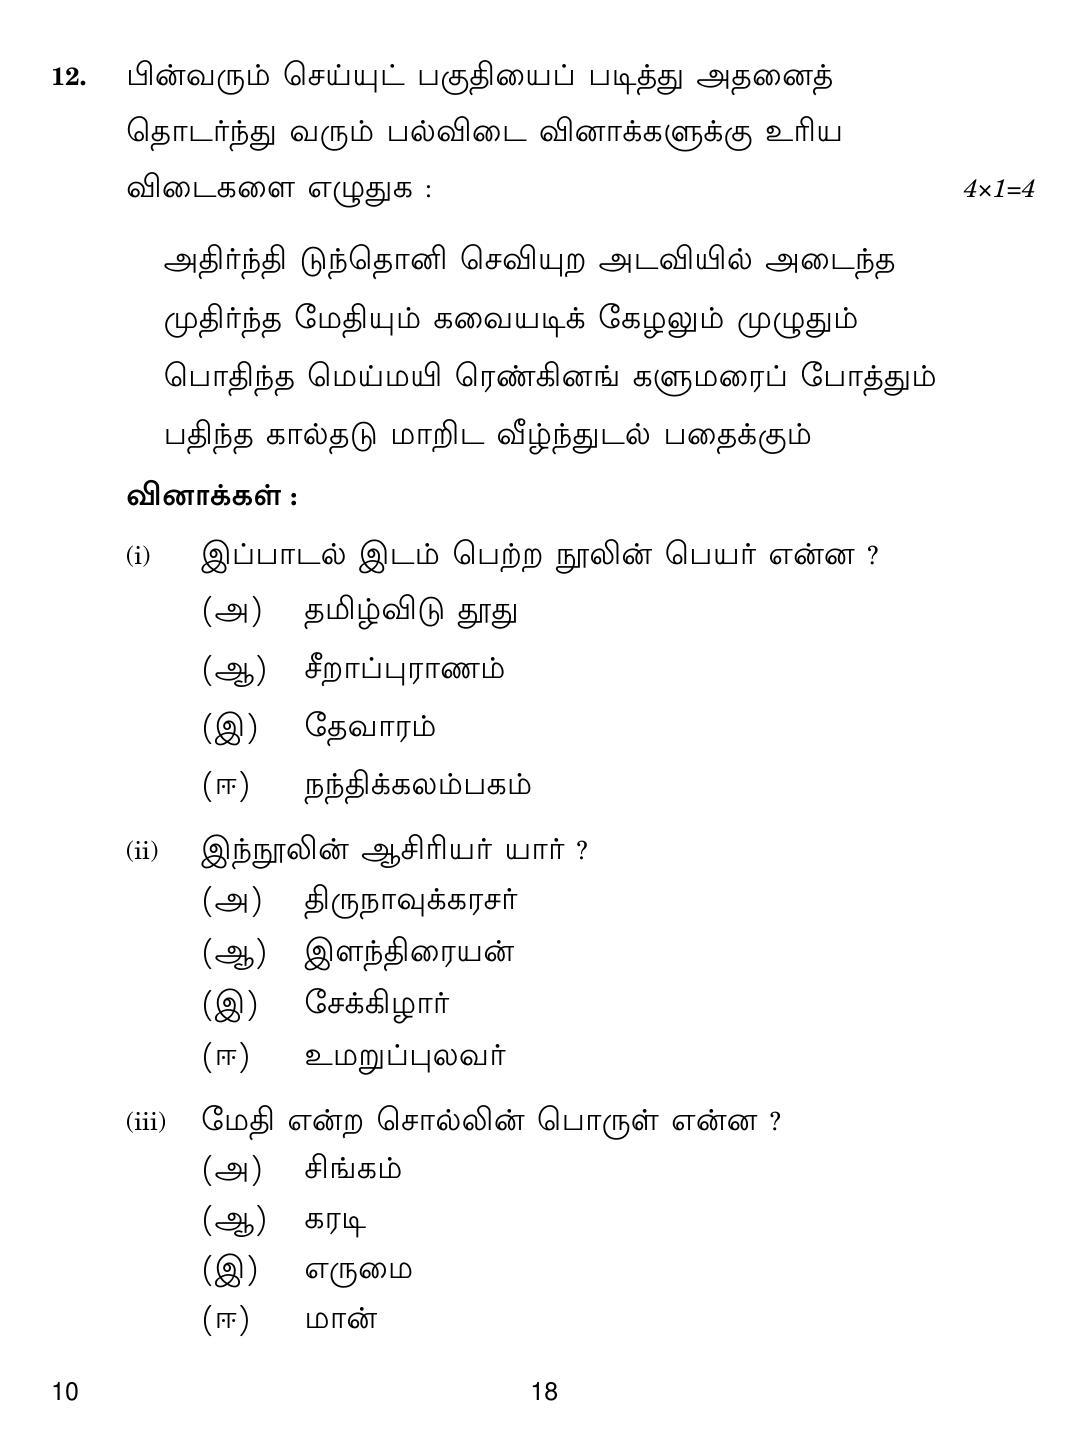 CBSE Class 10 10 Tamil 2019 Question Paper - Page 18